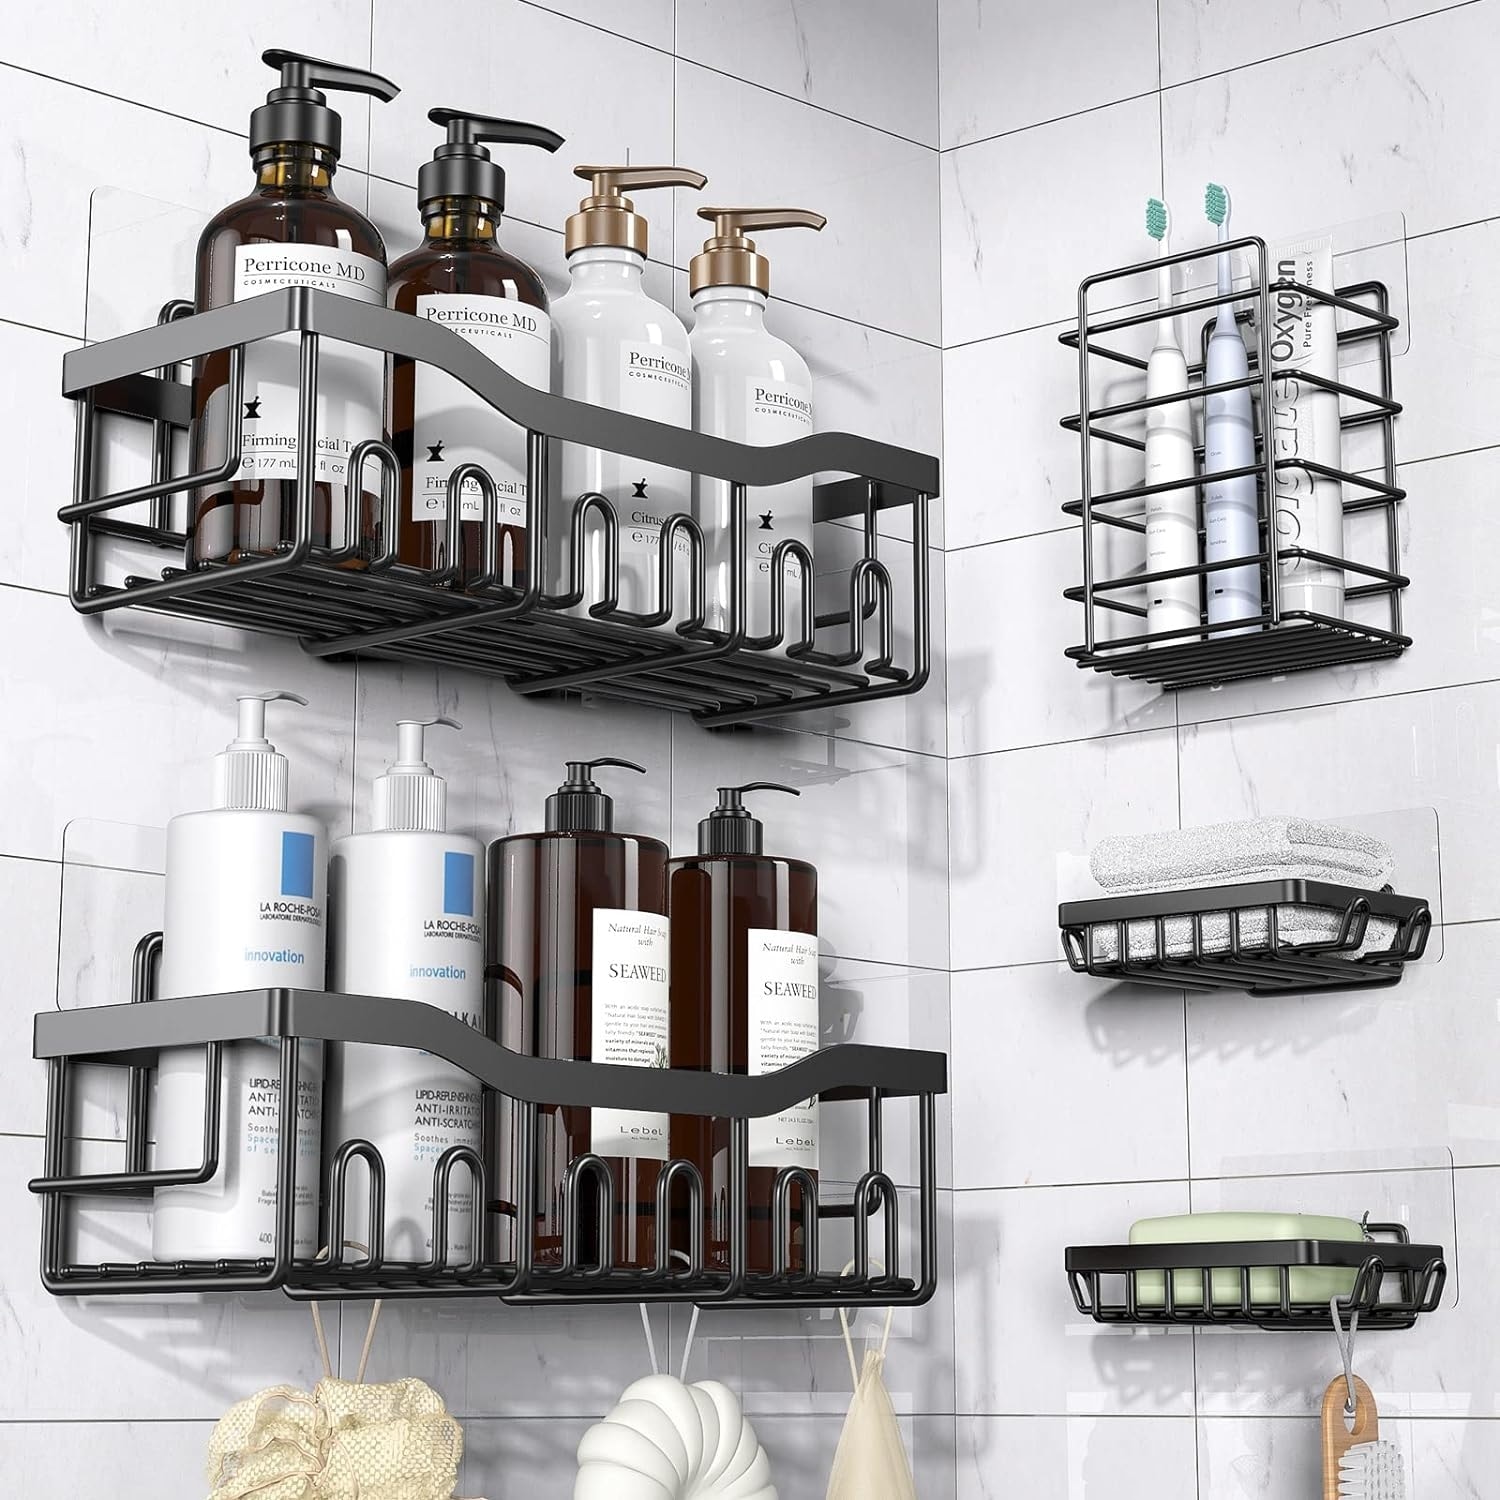 https://ak1.ostkcdn.com/images/products/is/images/direct/586dd3cbbf5cb15c49725838b4fcf5880df09fb8/5-Pack-Adhesive-Shower-Caddy-No-Drilling-Stainless-Steel-Shower-Rack.jpg